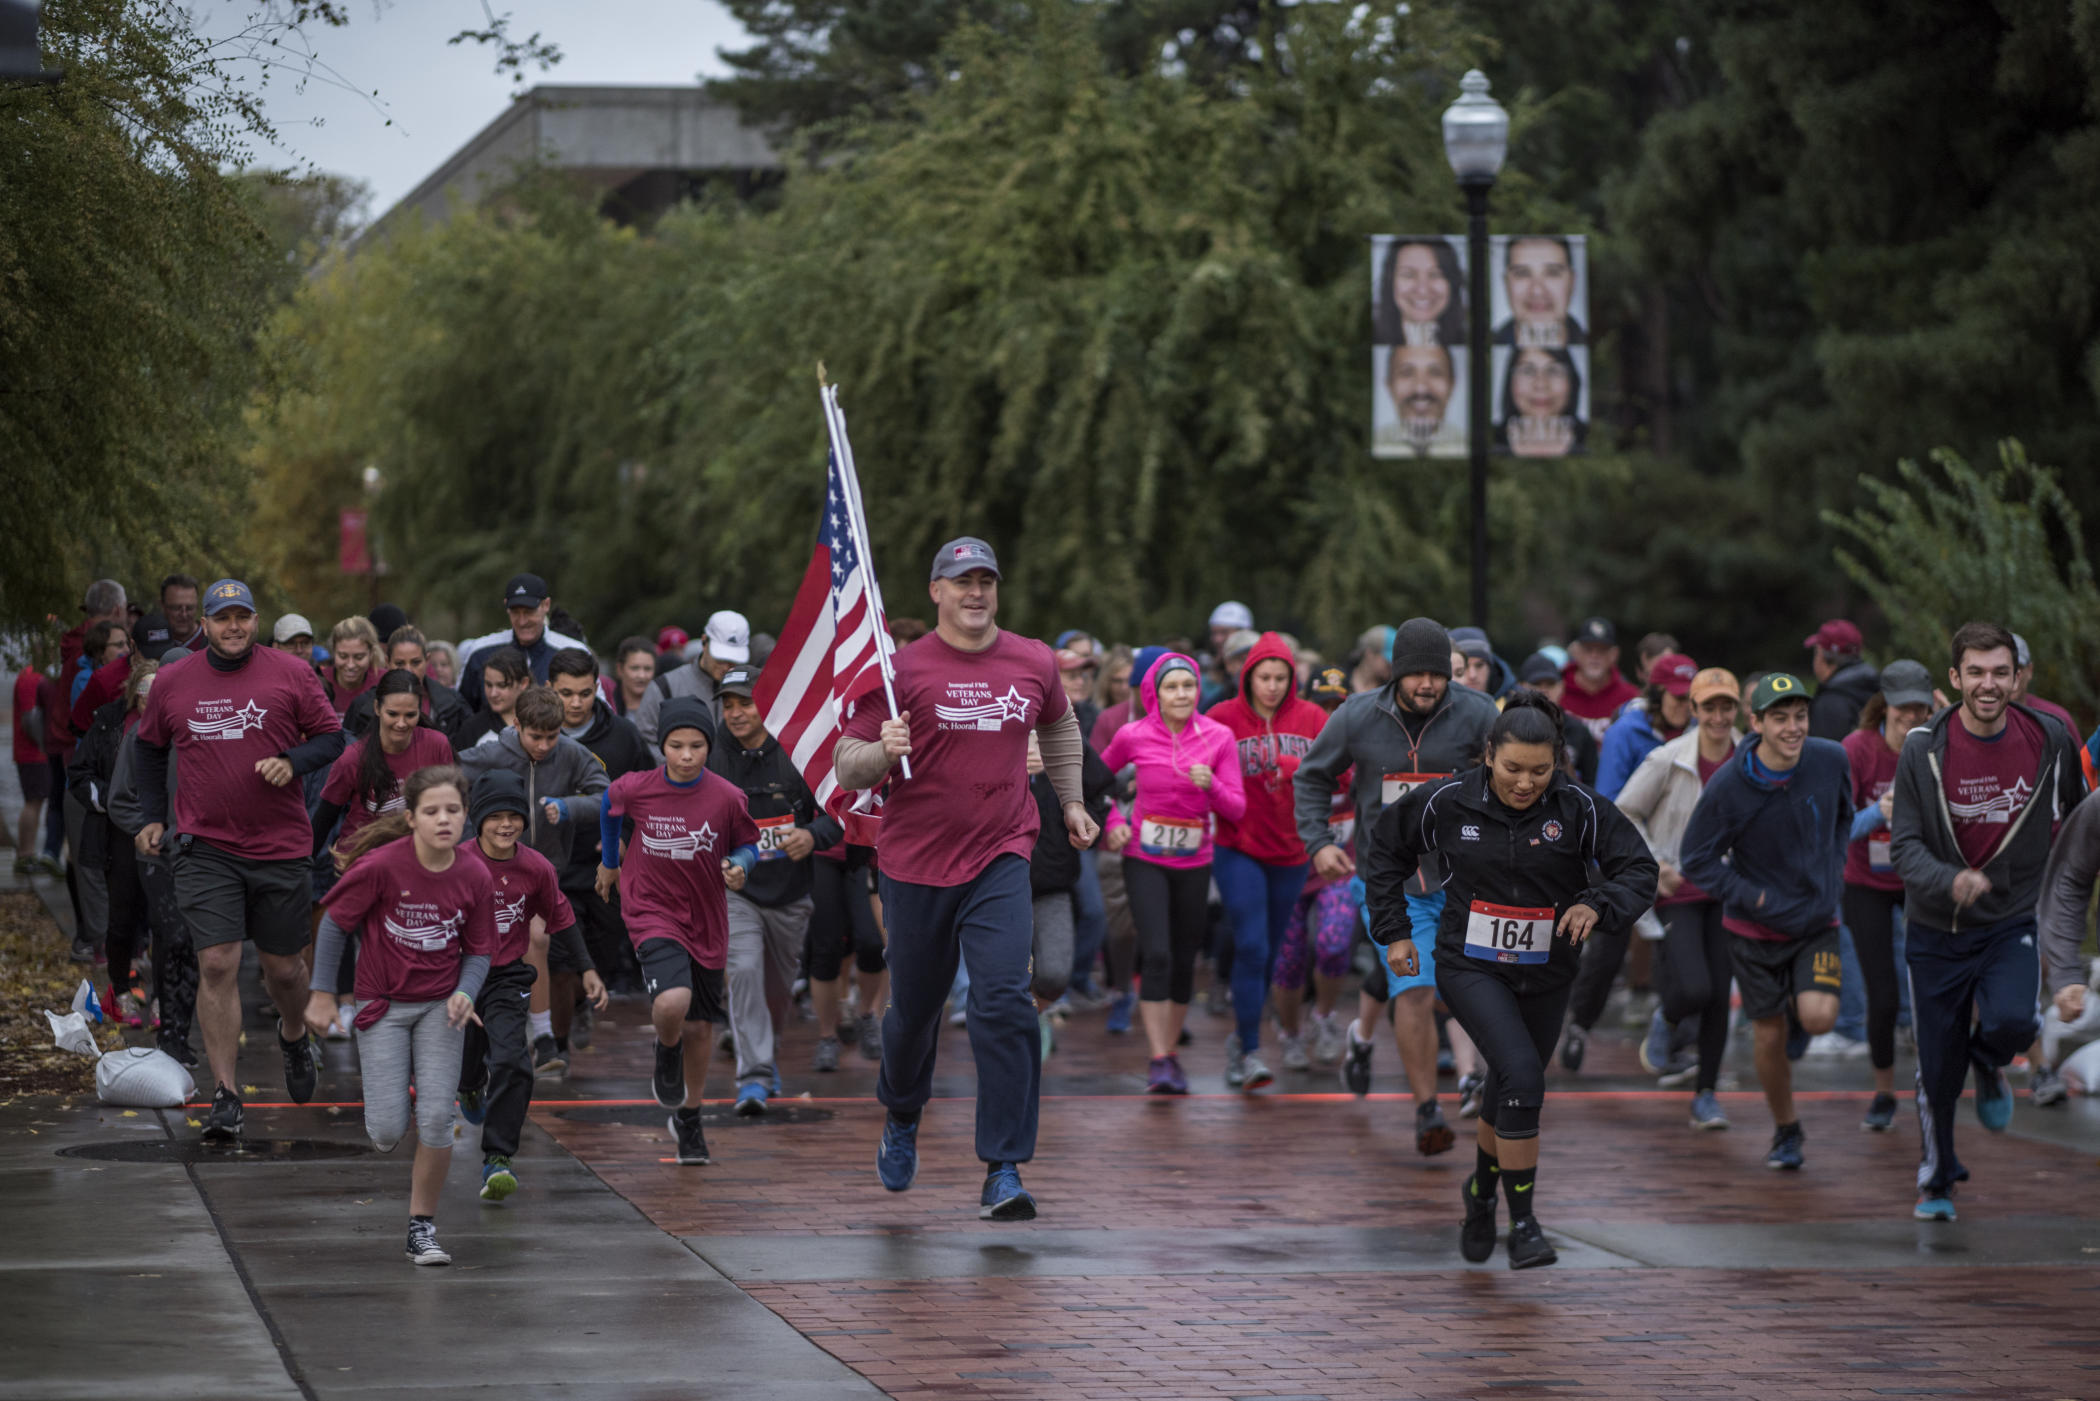 Mike Guzzi runs with the American flag in front of dozens of people, leading them across campus in a 5K run/walk